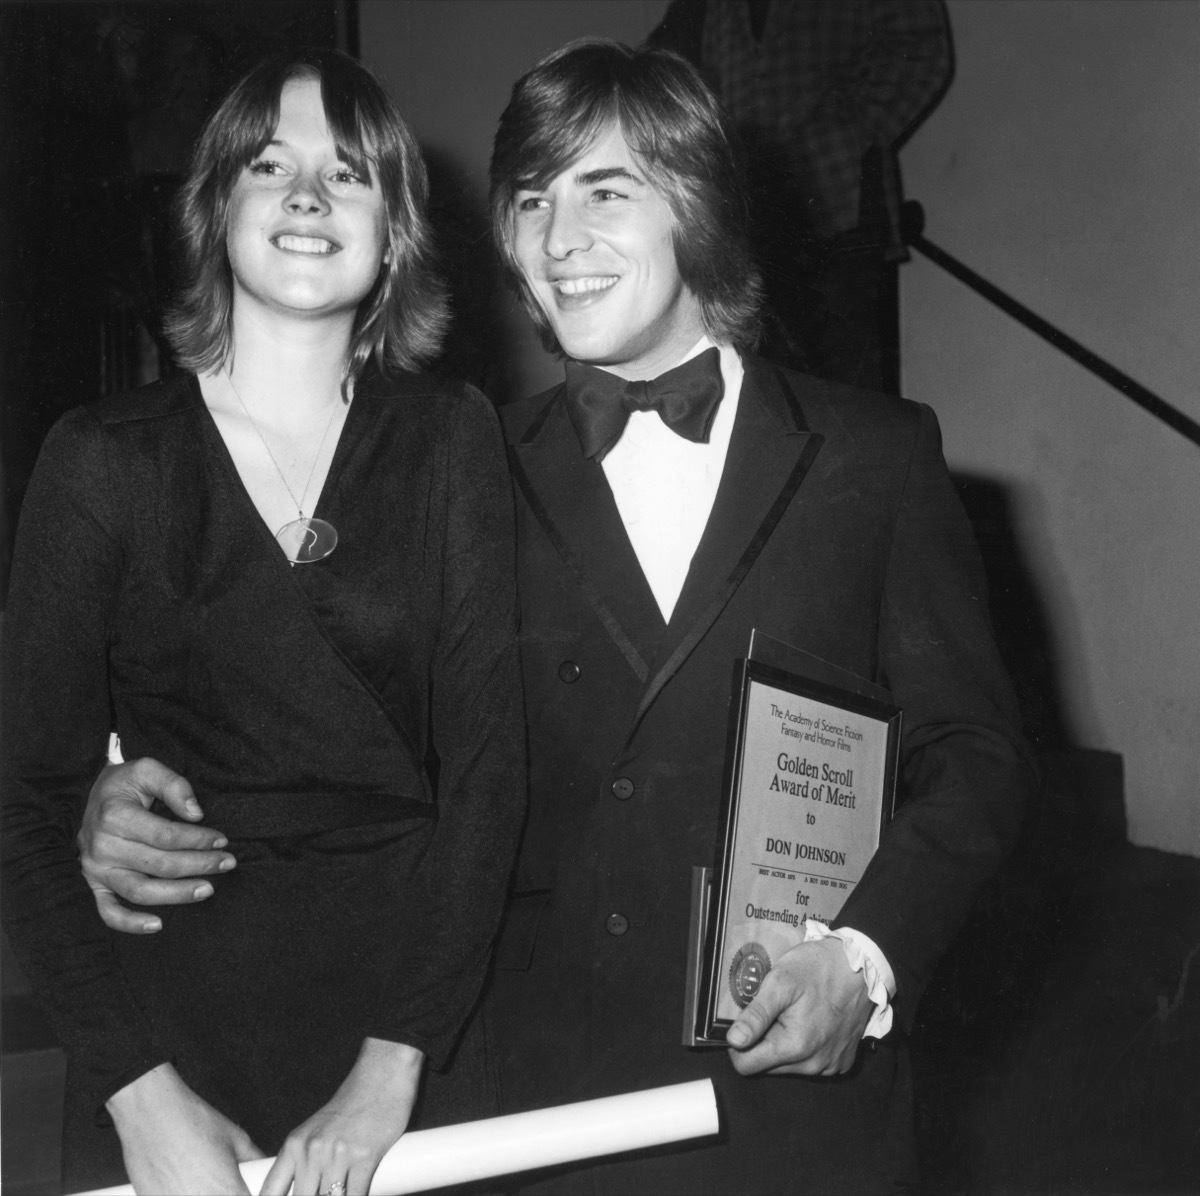 Melanie Griffith and Don Johnson in 1976